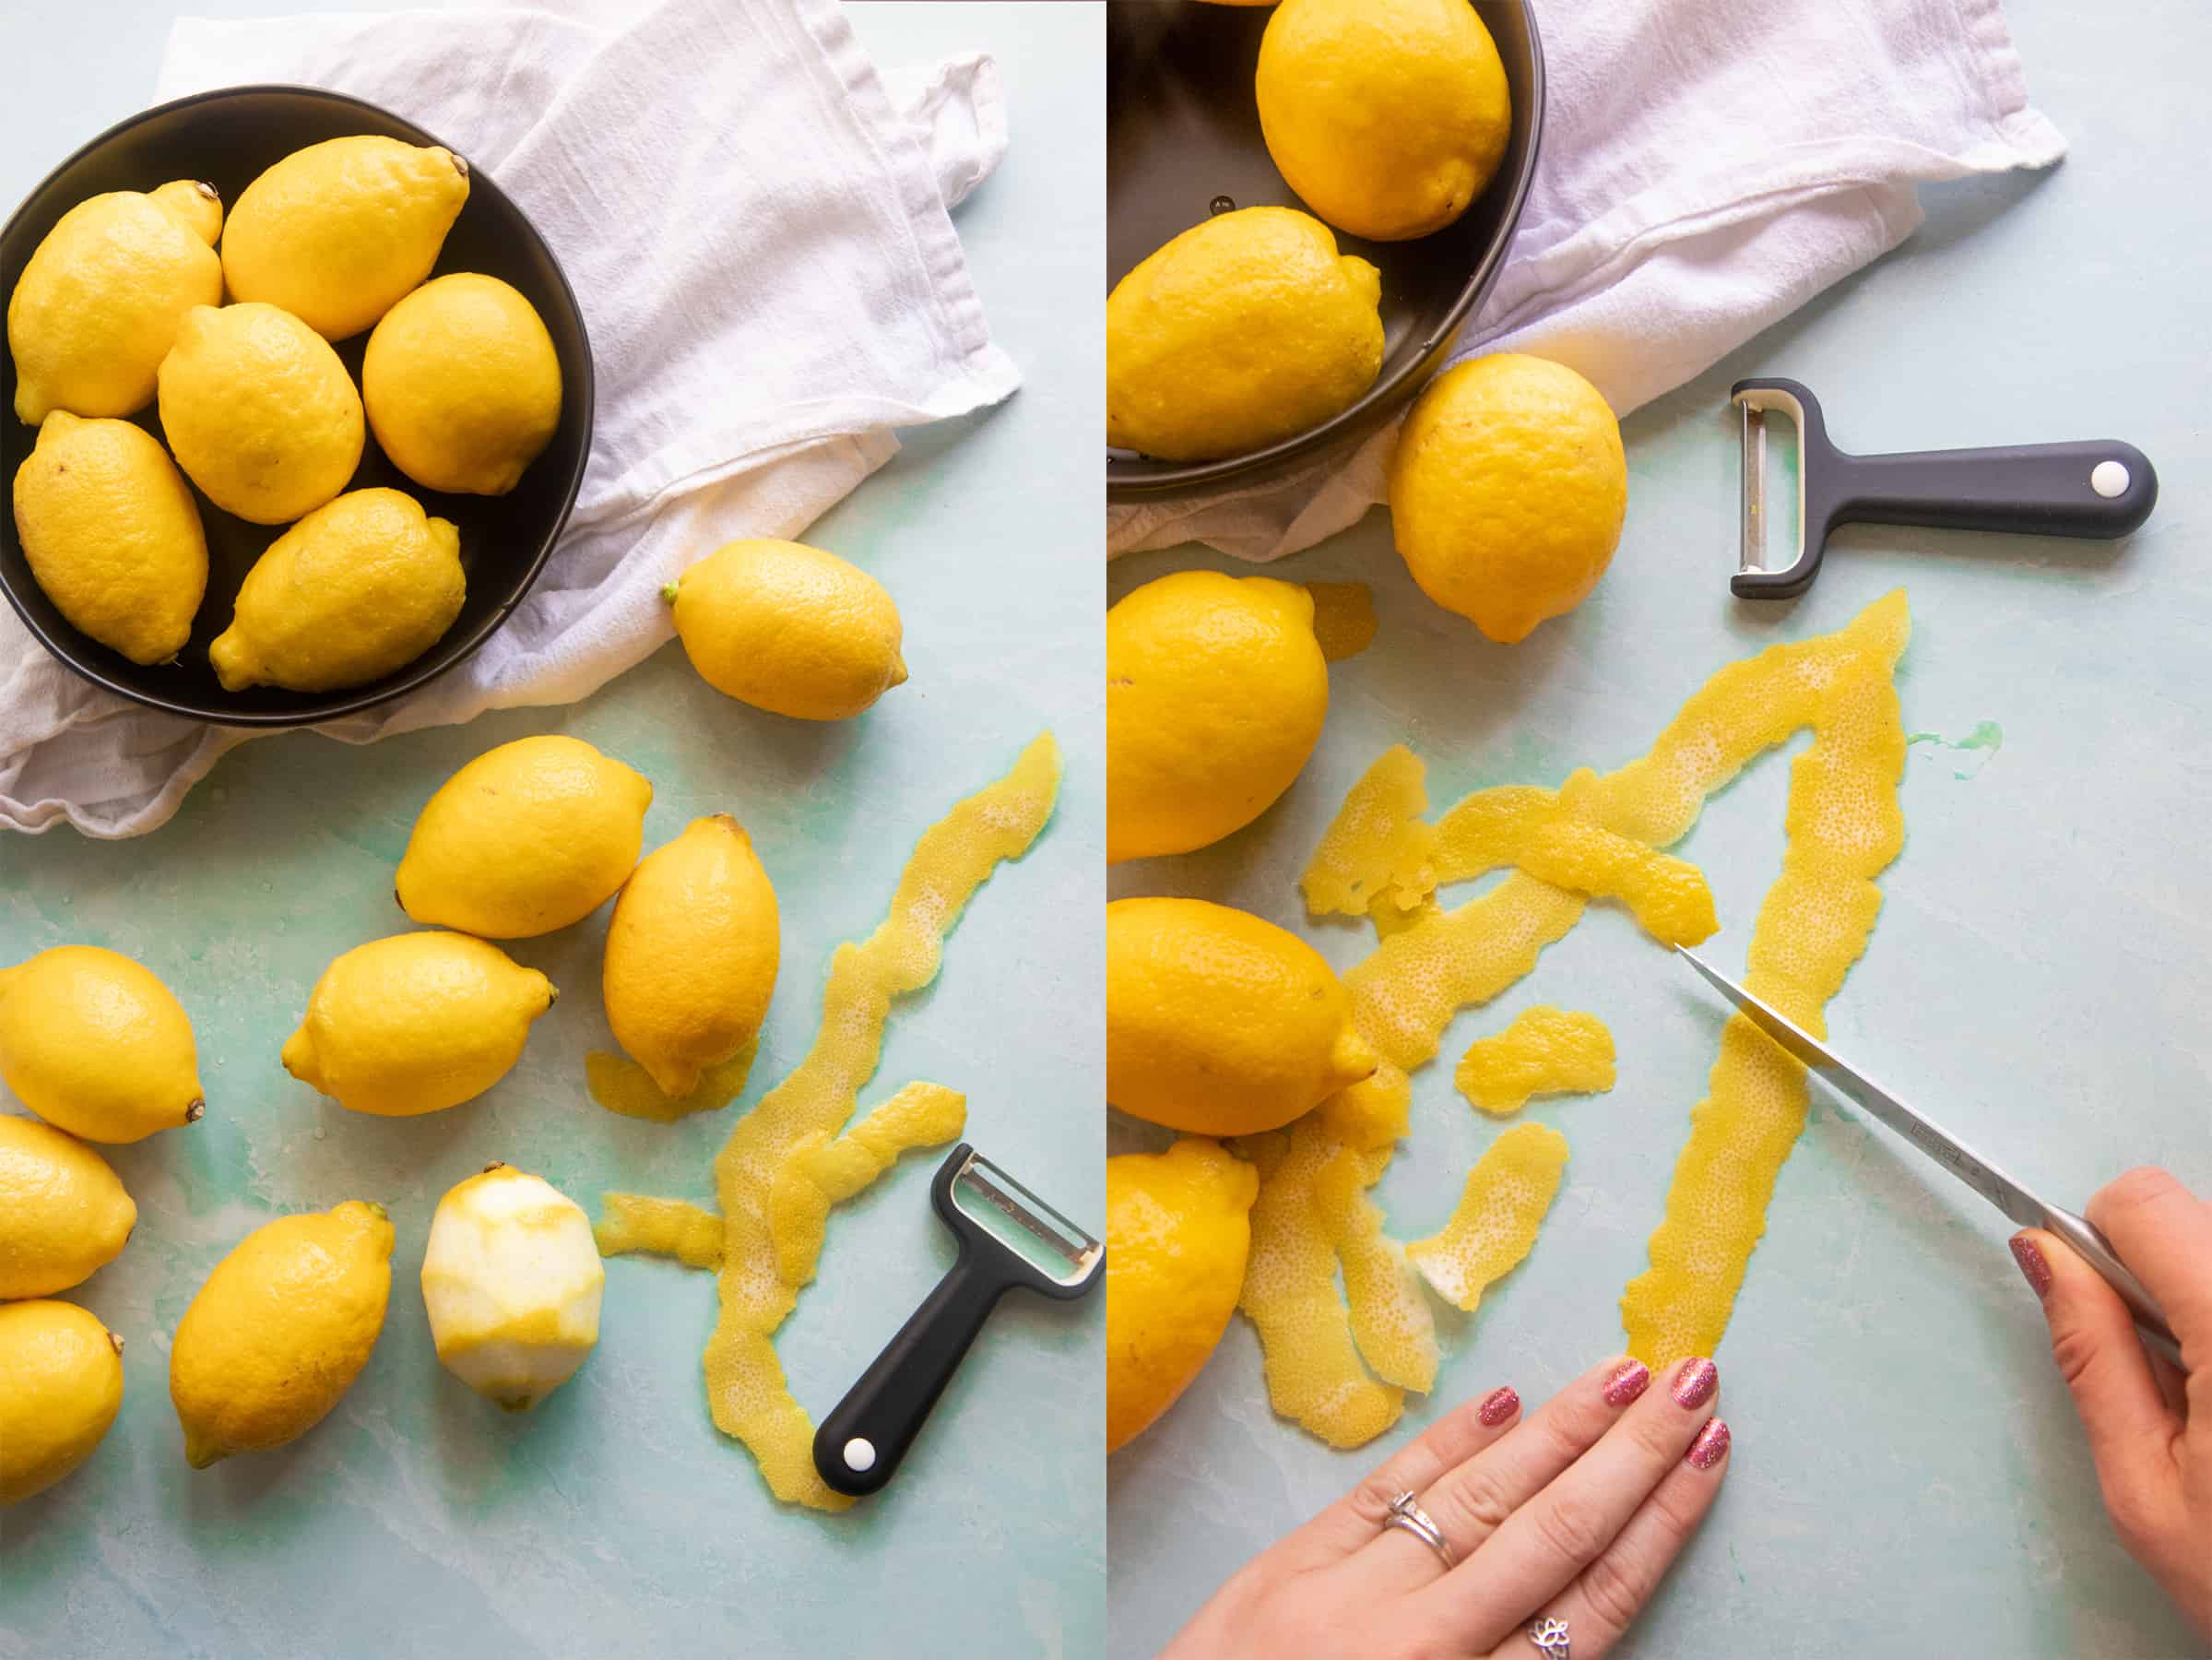 Split image of lemons being peeled. On the left, a peeler lies next to a peeled lemon among many intact lemons. On the right, hands use a paring knife to cut the peels.